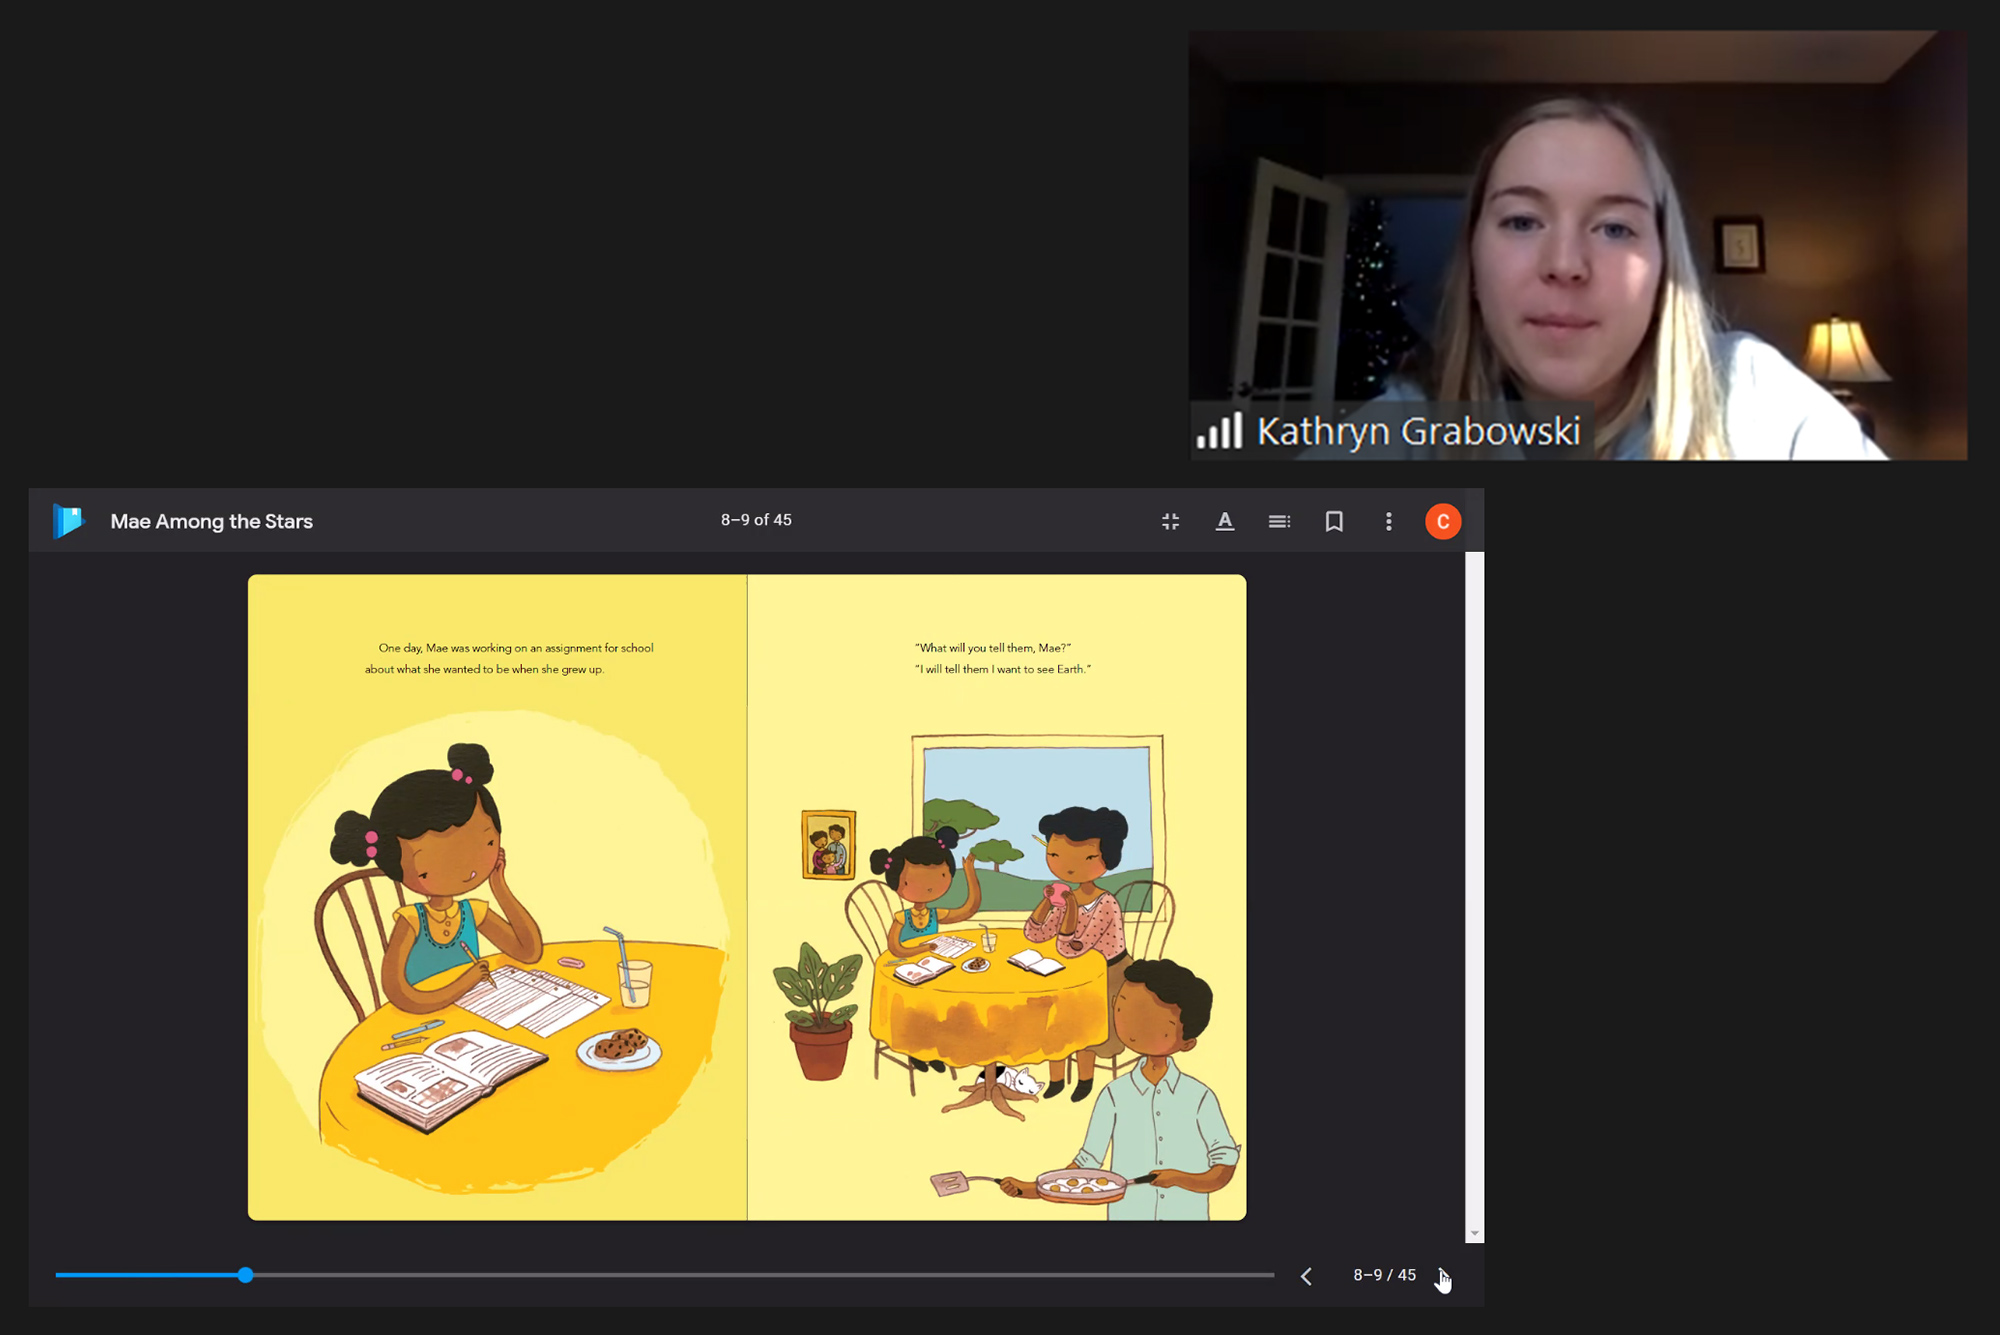 Screenshots of student athlete Kathryn Grabowski reading a children's book, Mae Among the Stars, to the Boston Public School students via zoom. The story book is displayed on the screen; on the left page, a young girl sits in front of a notebook, on the next page, she sits at the table with parents and discusses what she wants to be when she grows up.